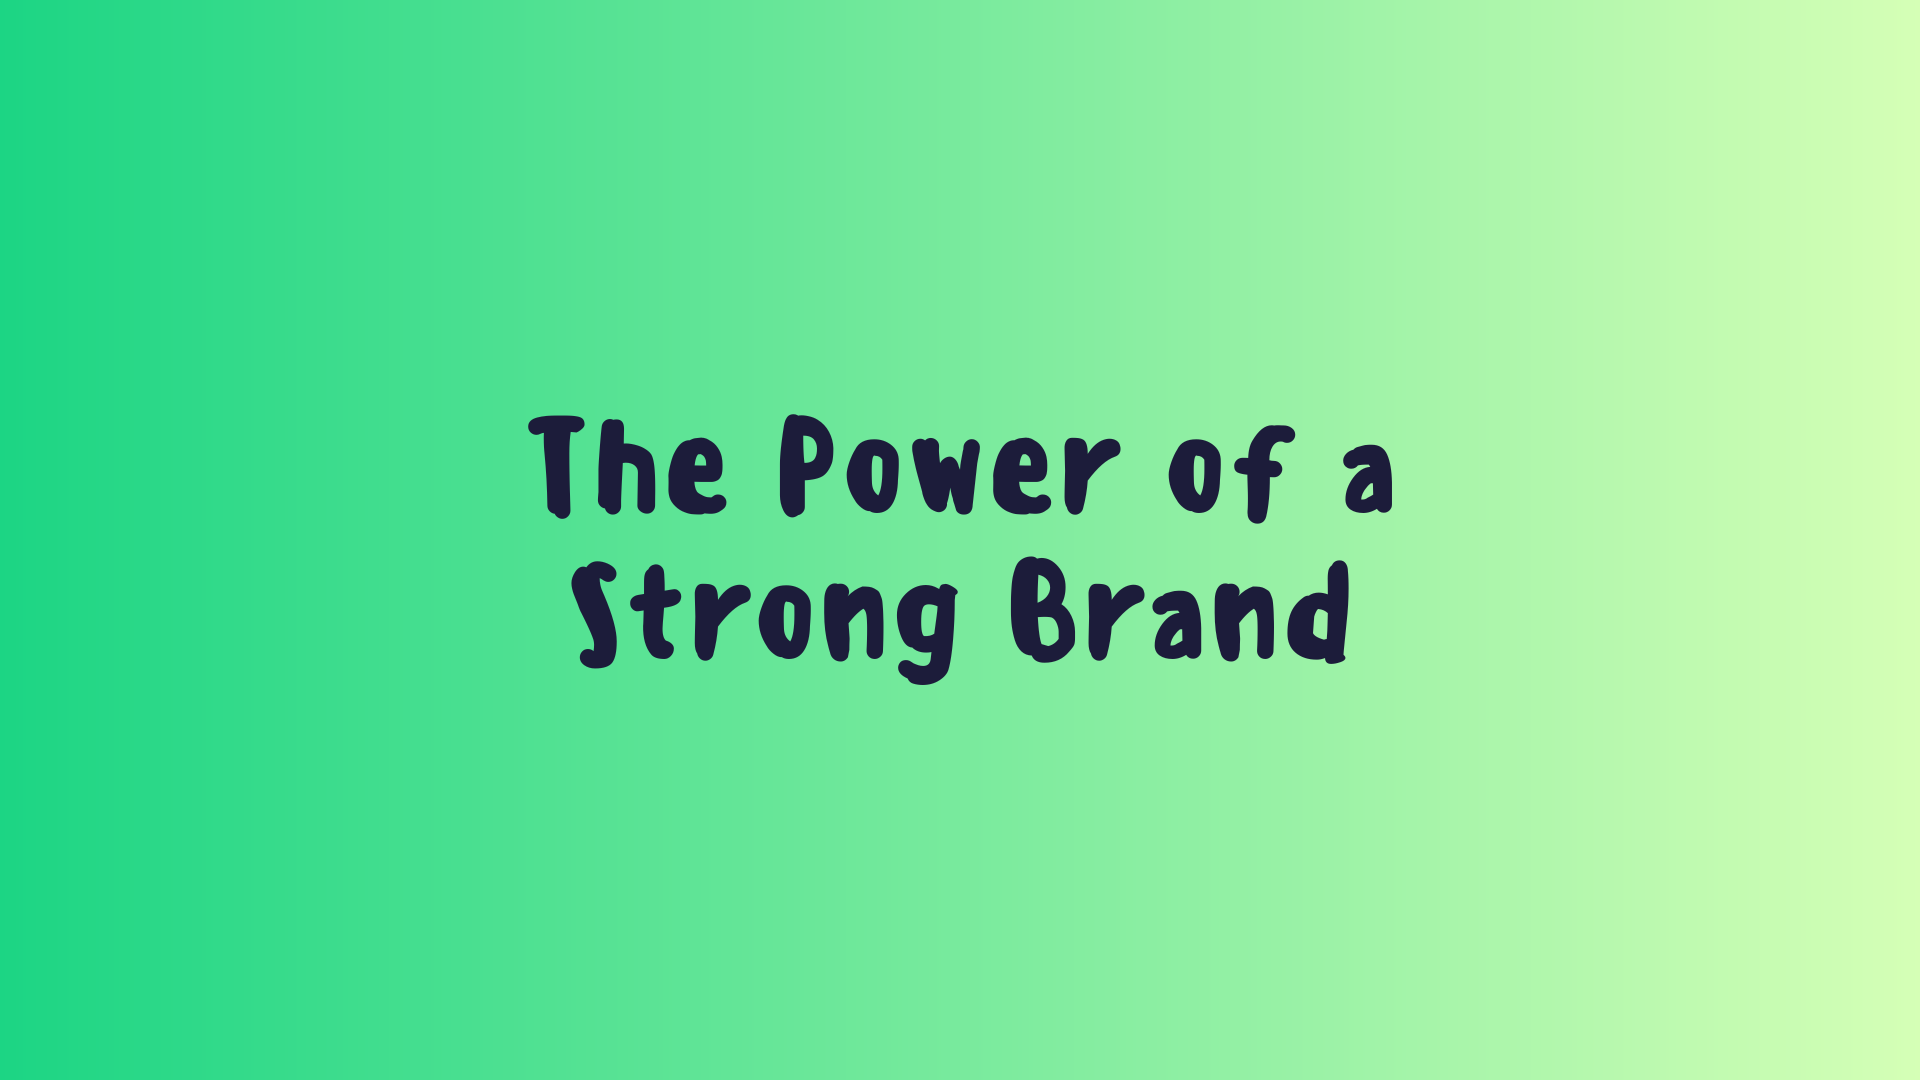 Power of a strong brand